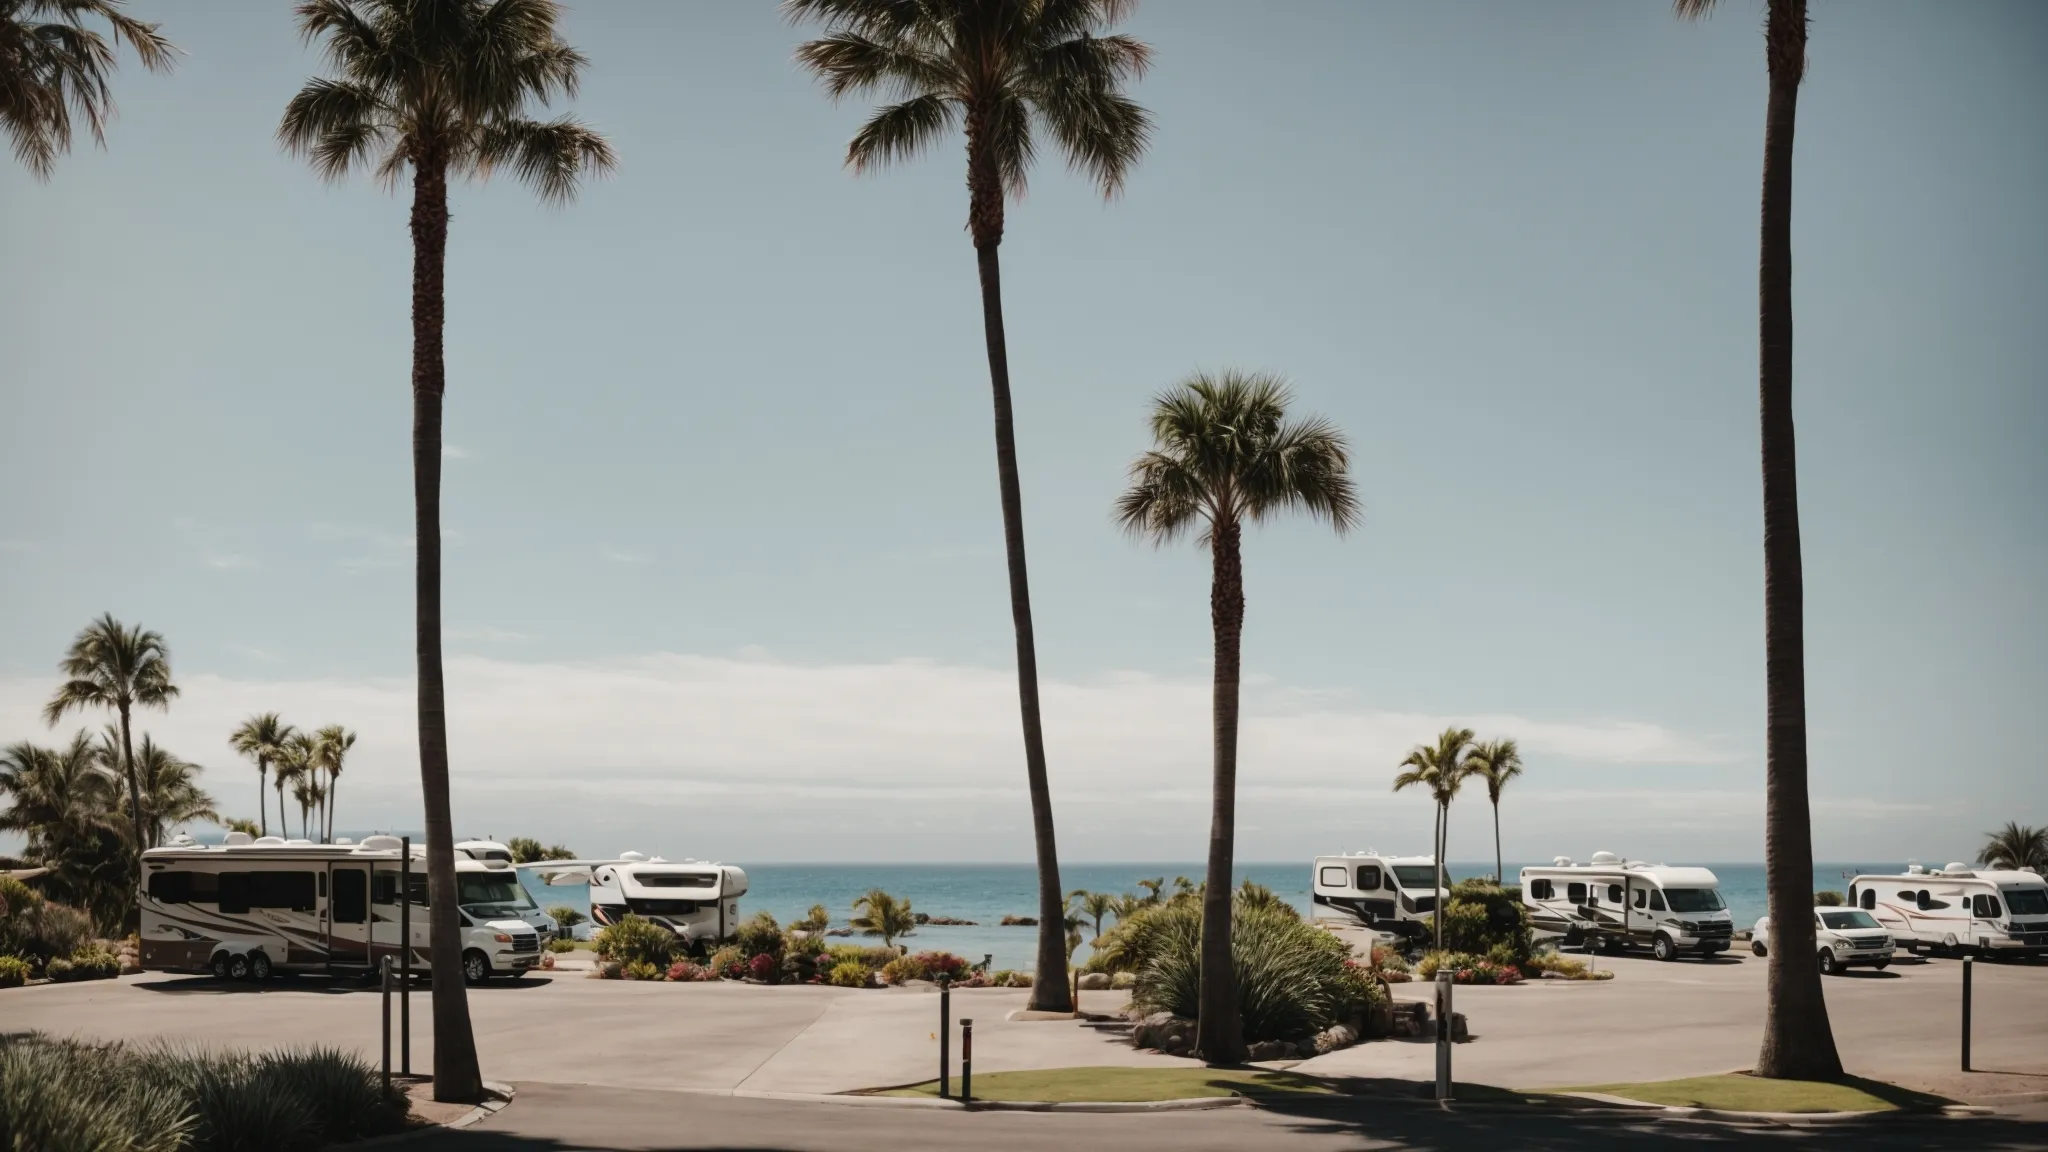 a scenic rv park overlooking the pacific ocean with spaces for numerous rvs amidst palm trees and sunshine.